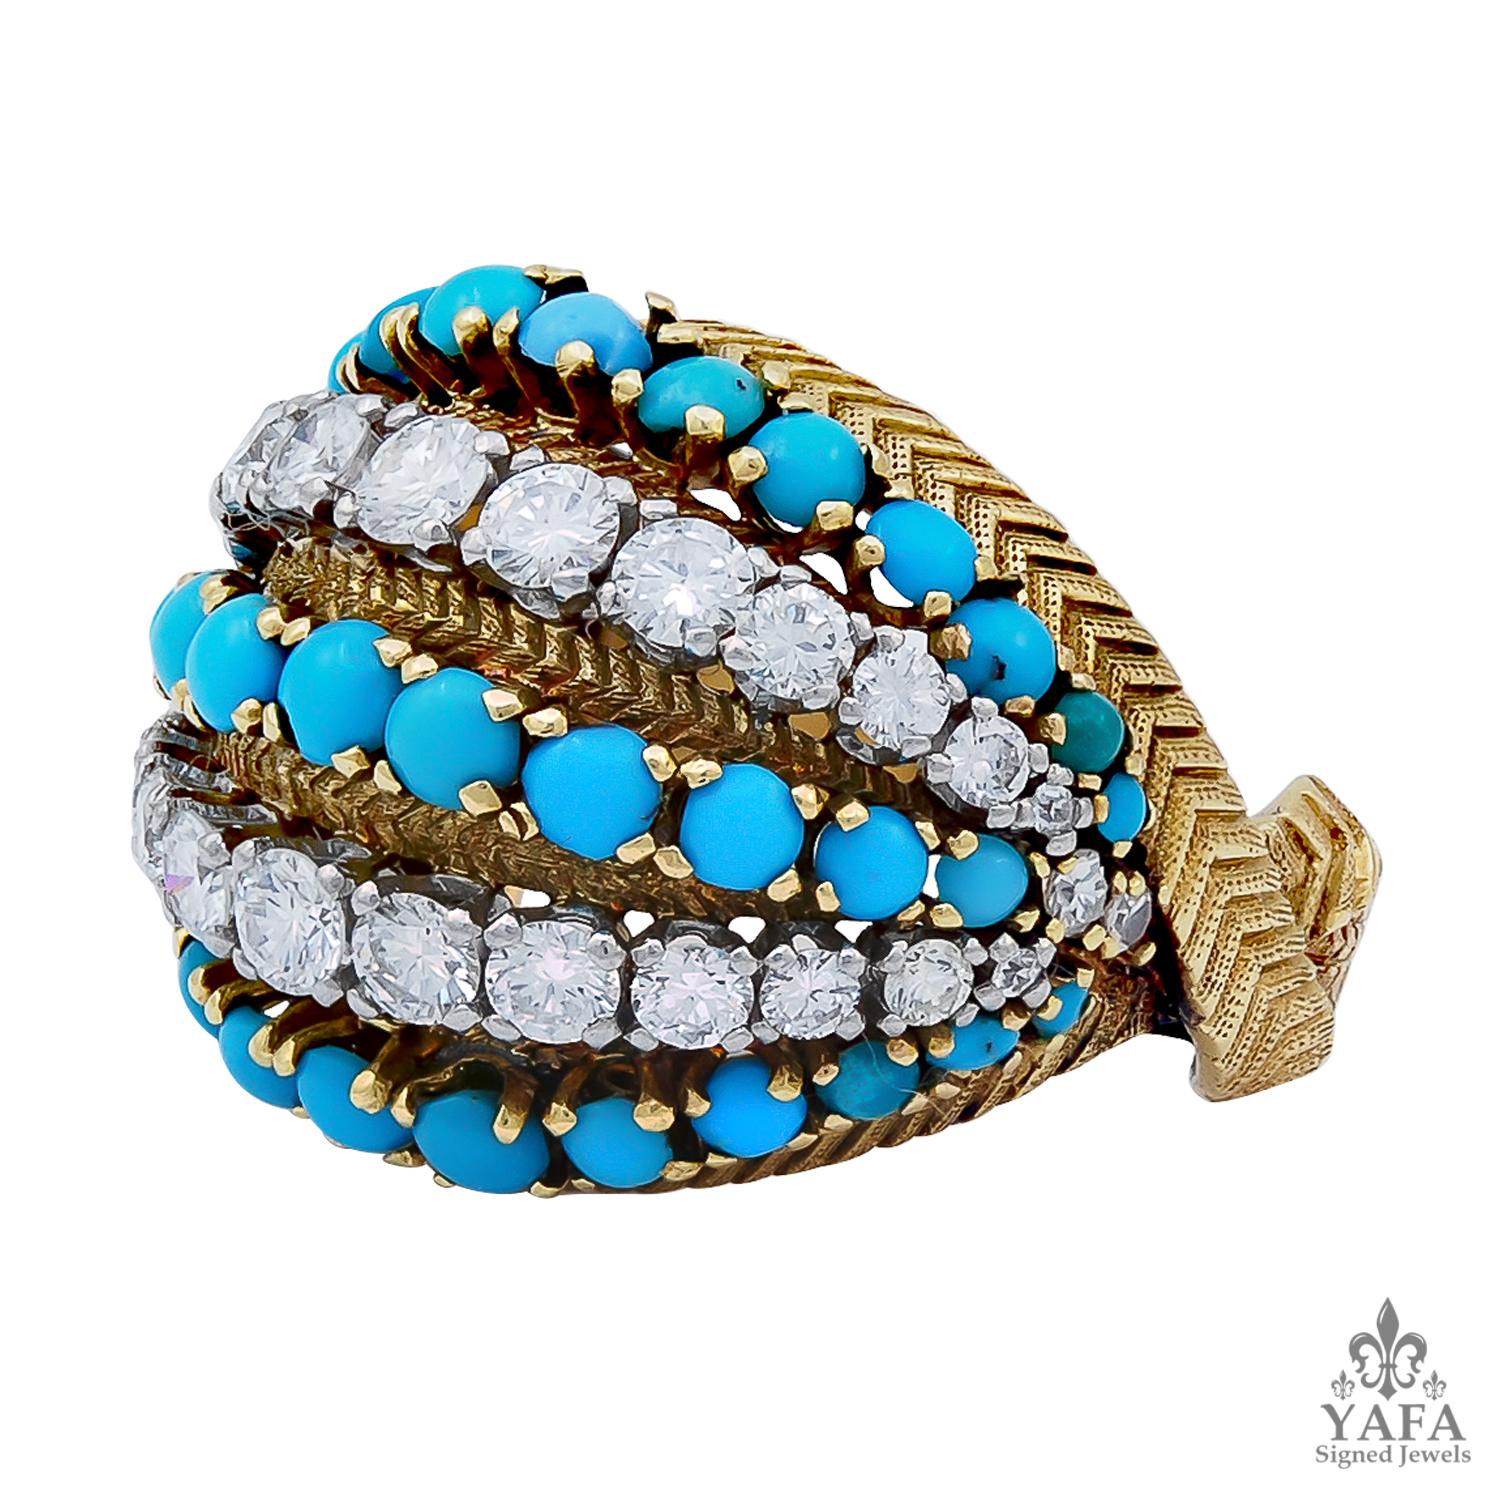 TIFFANY & Co Diamond, Turquoise Dome Ring
An 18k yellow gold dome ring, set with brilliant-cut diamonds and turquoise.
ring size  6.75
approx.  18.8 grams
signed “TIFFANY & CO.“; circa 1970s